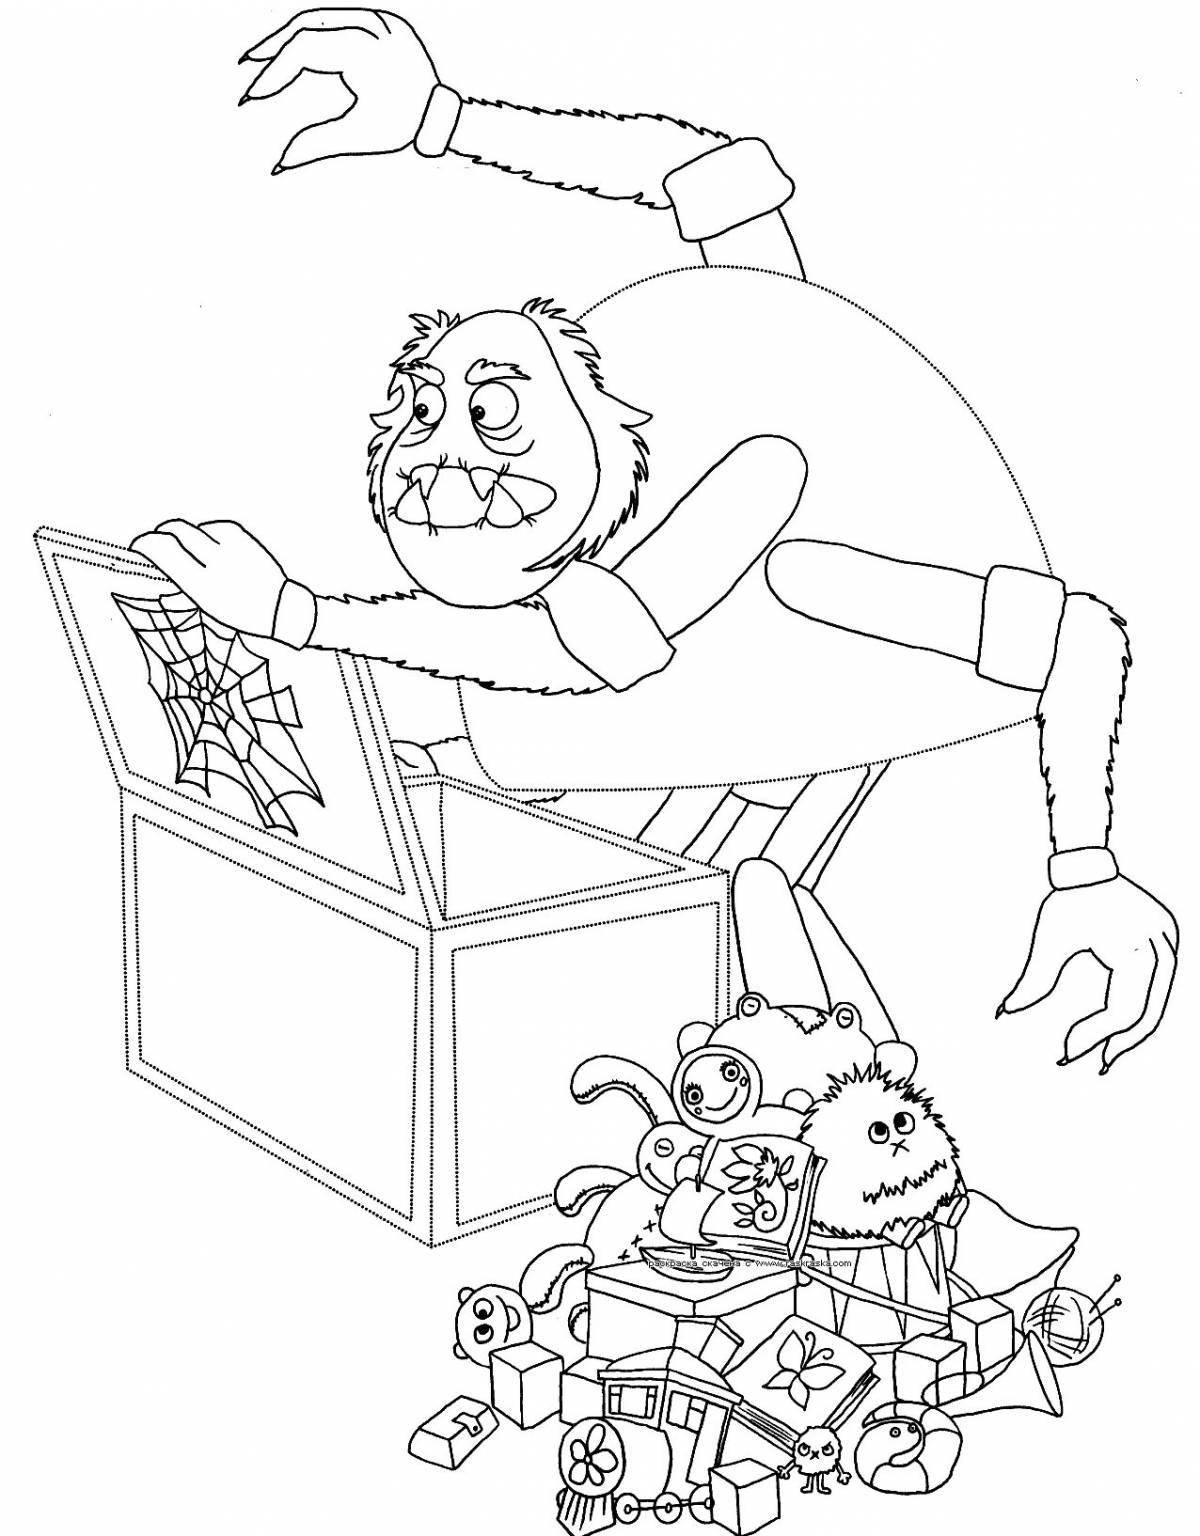 Glorious grandfather coloring page